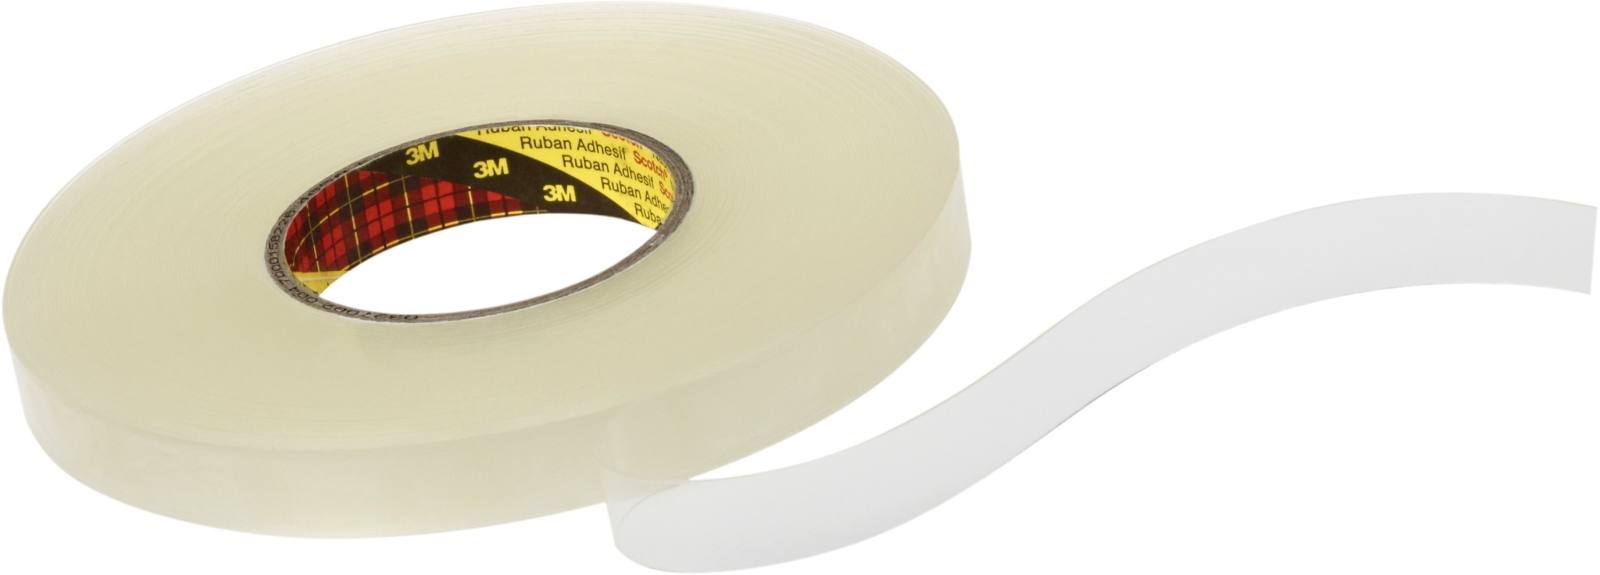 3M double-sided removable adhesive tape 4658F, transparent, 1200 mm x 25 m, 0.8 mm